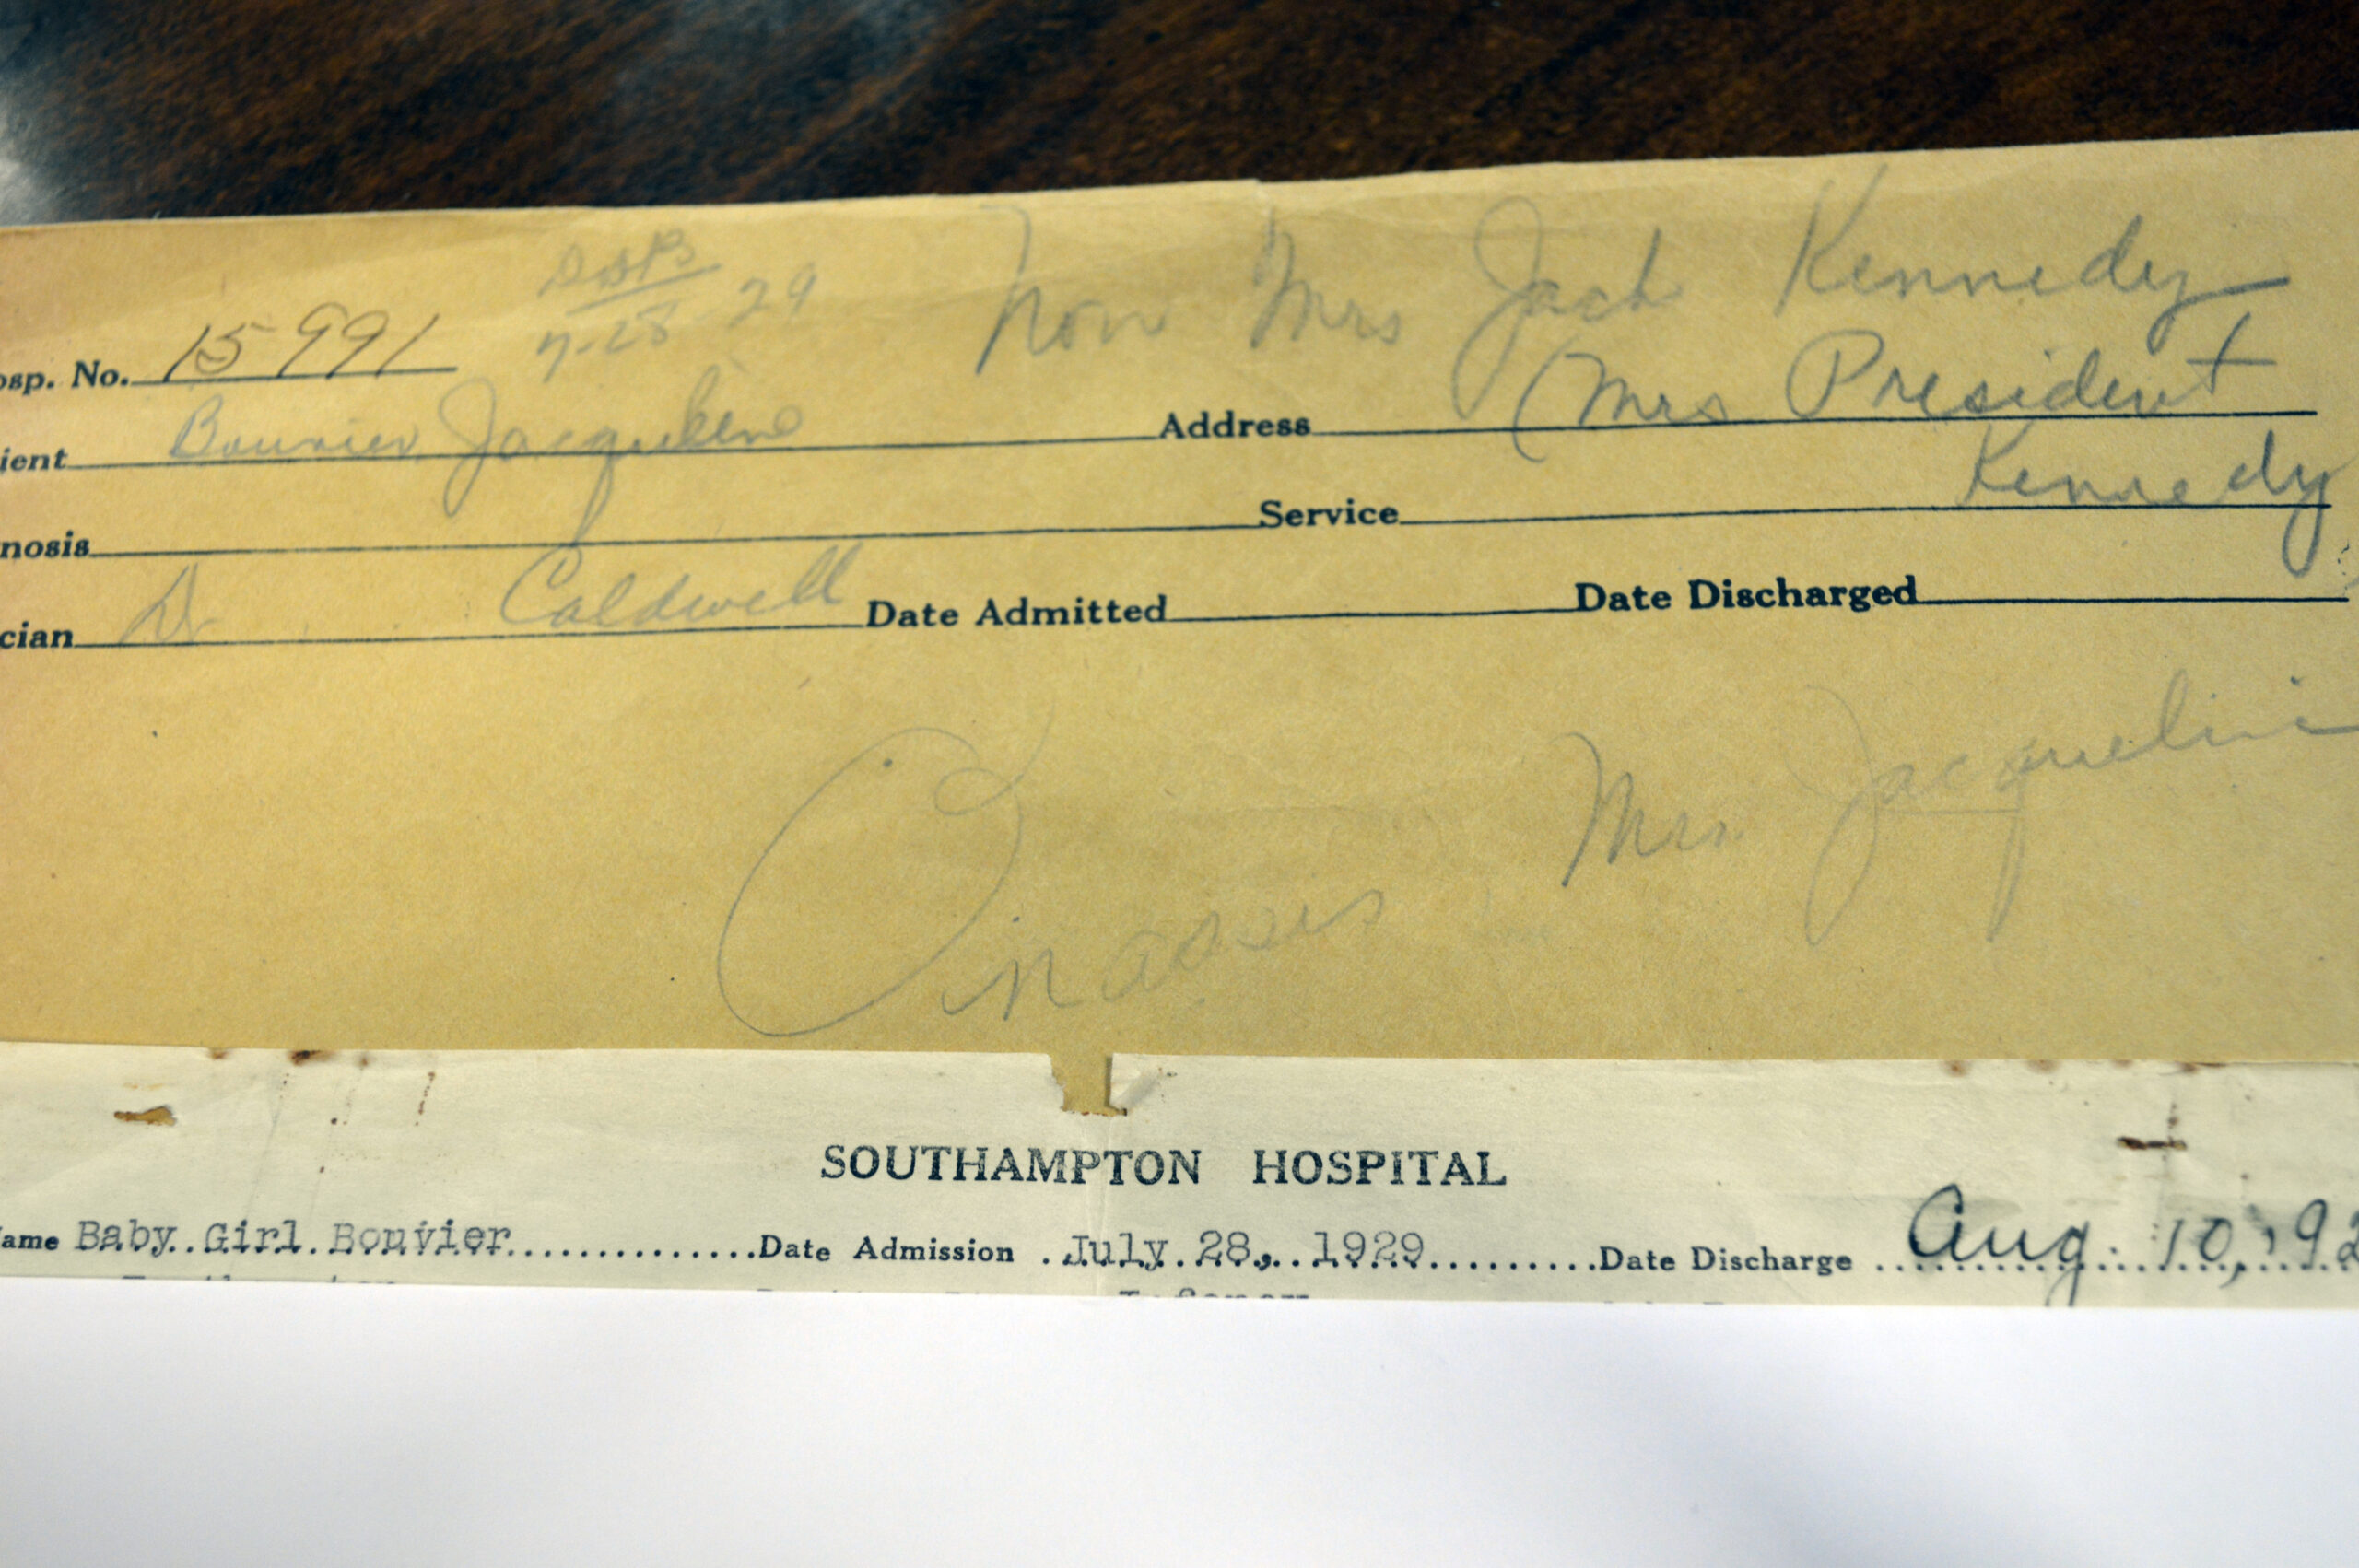 Inside Stony Brook Southampton Hospital's birth records of Jacqueline Bouvier, who would go on to marry President John F. Kennedy and become first lady of the United States. FILE PHOTO